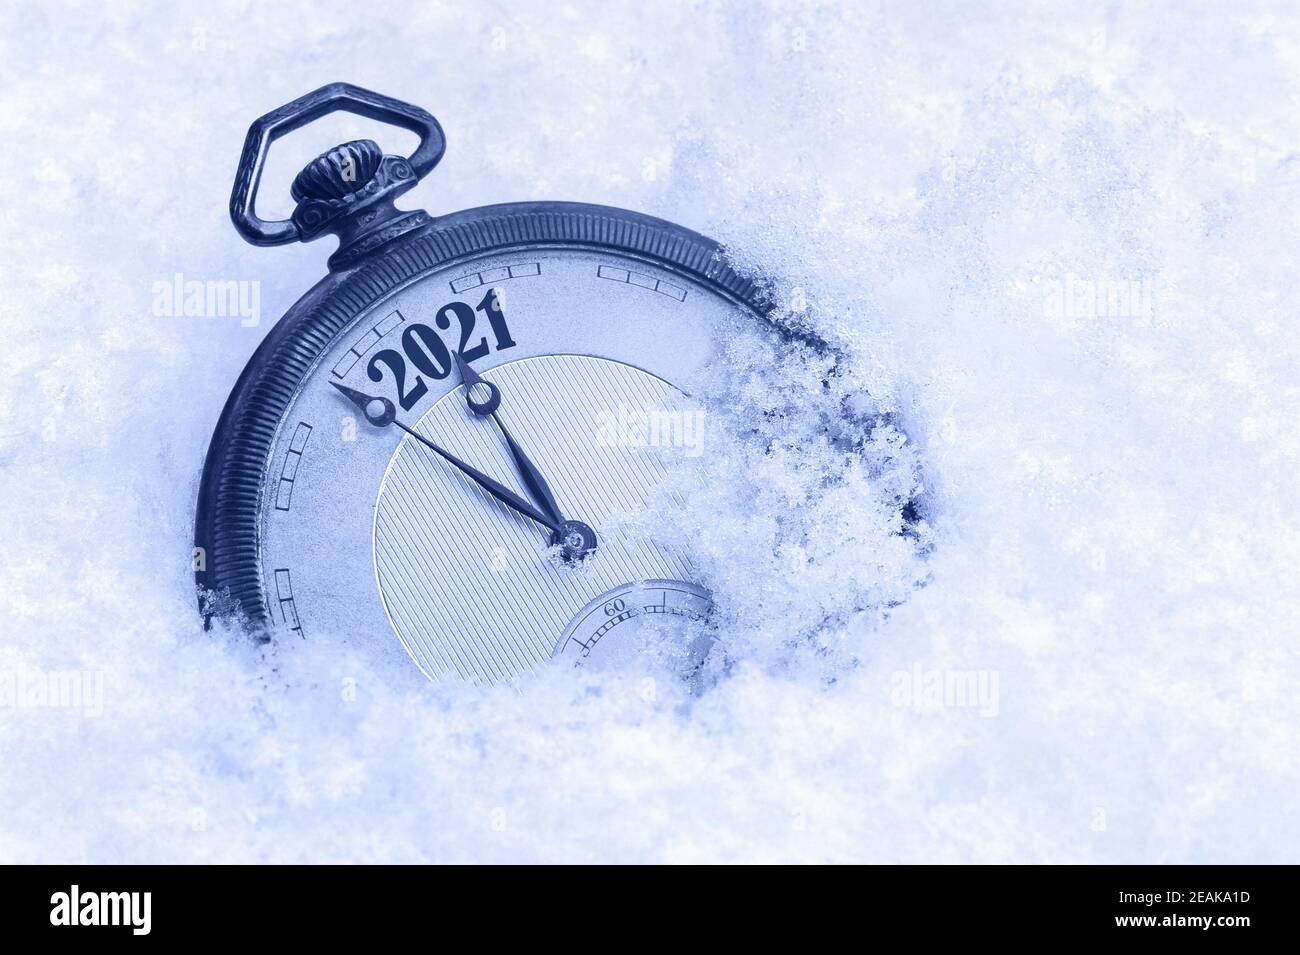 New Year 2021 greeting card, 2021 new year, pocket watch in snow, happy new year concept, countdown to midnight Stock Photo